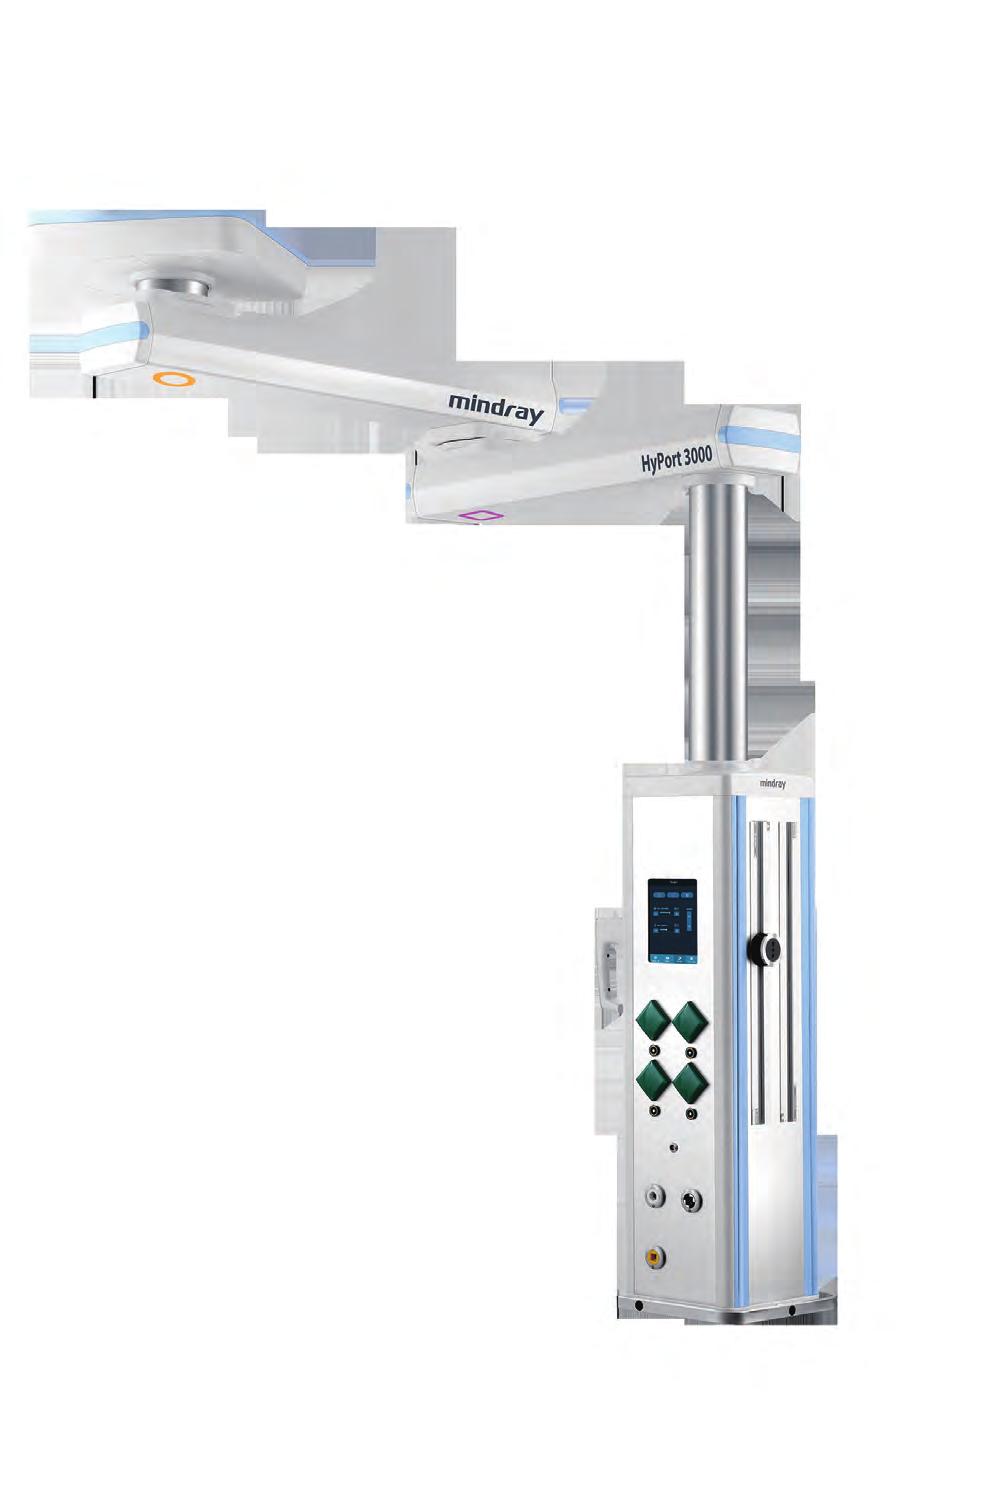 HyPort Series With the higher requirement of the healthcare, and continuing focus on the